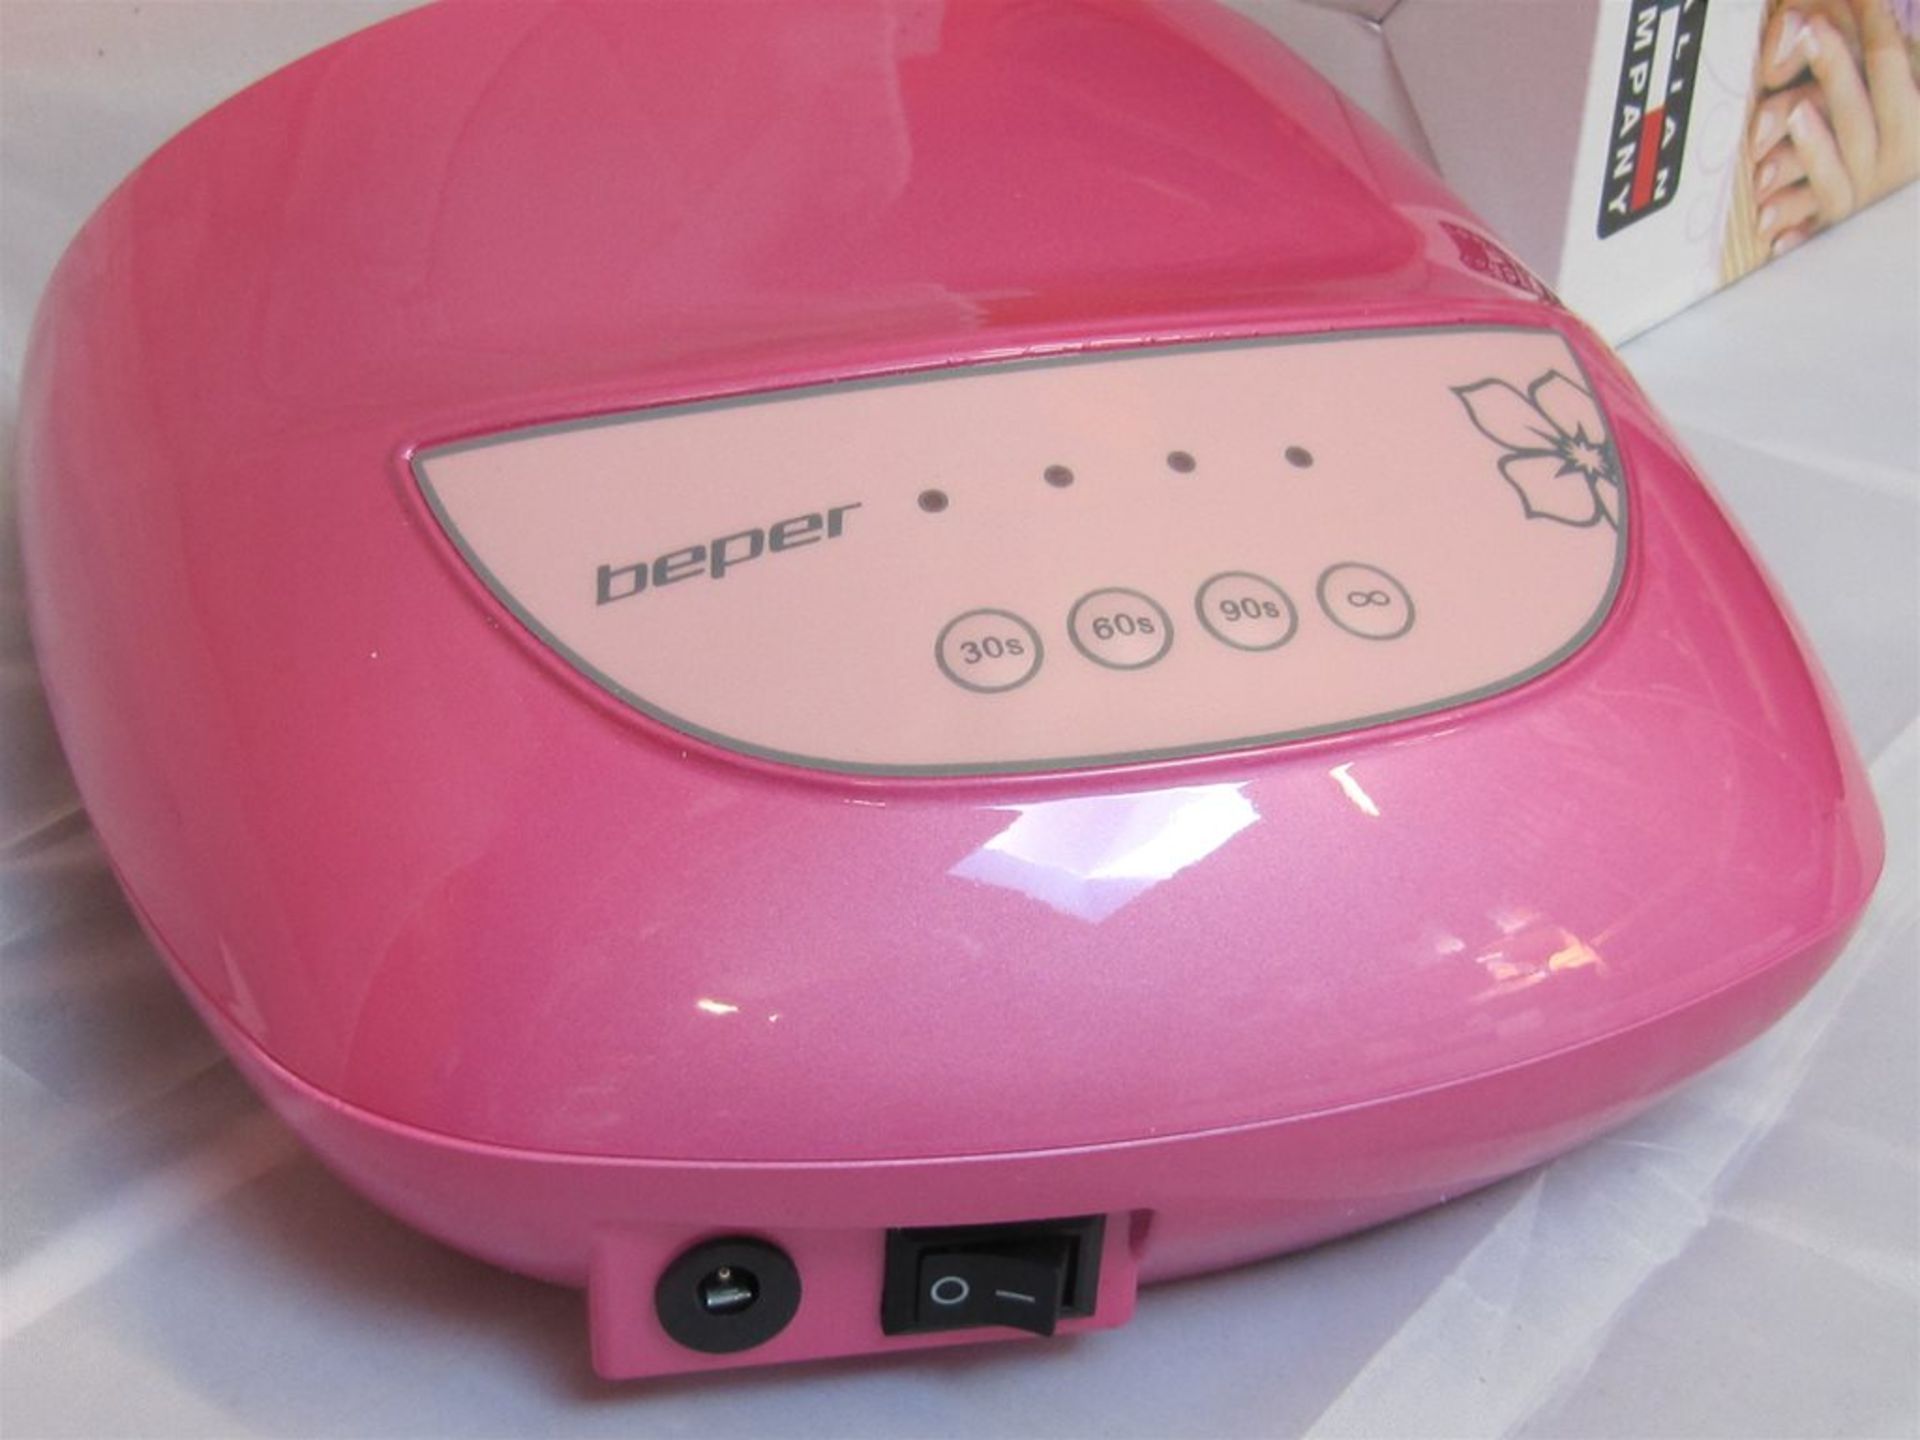 156) Beper LED Nail Lamp. 12w Rapid Dry Time. No vat on Hammer. - Image 4 of 4